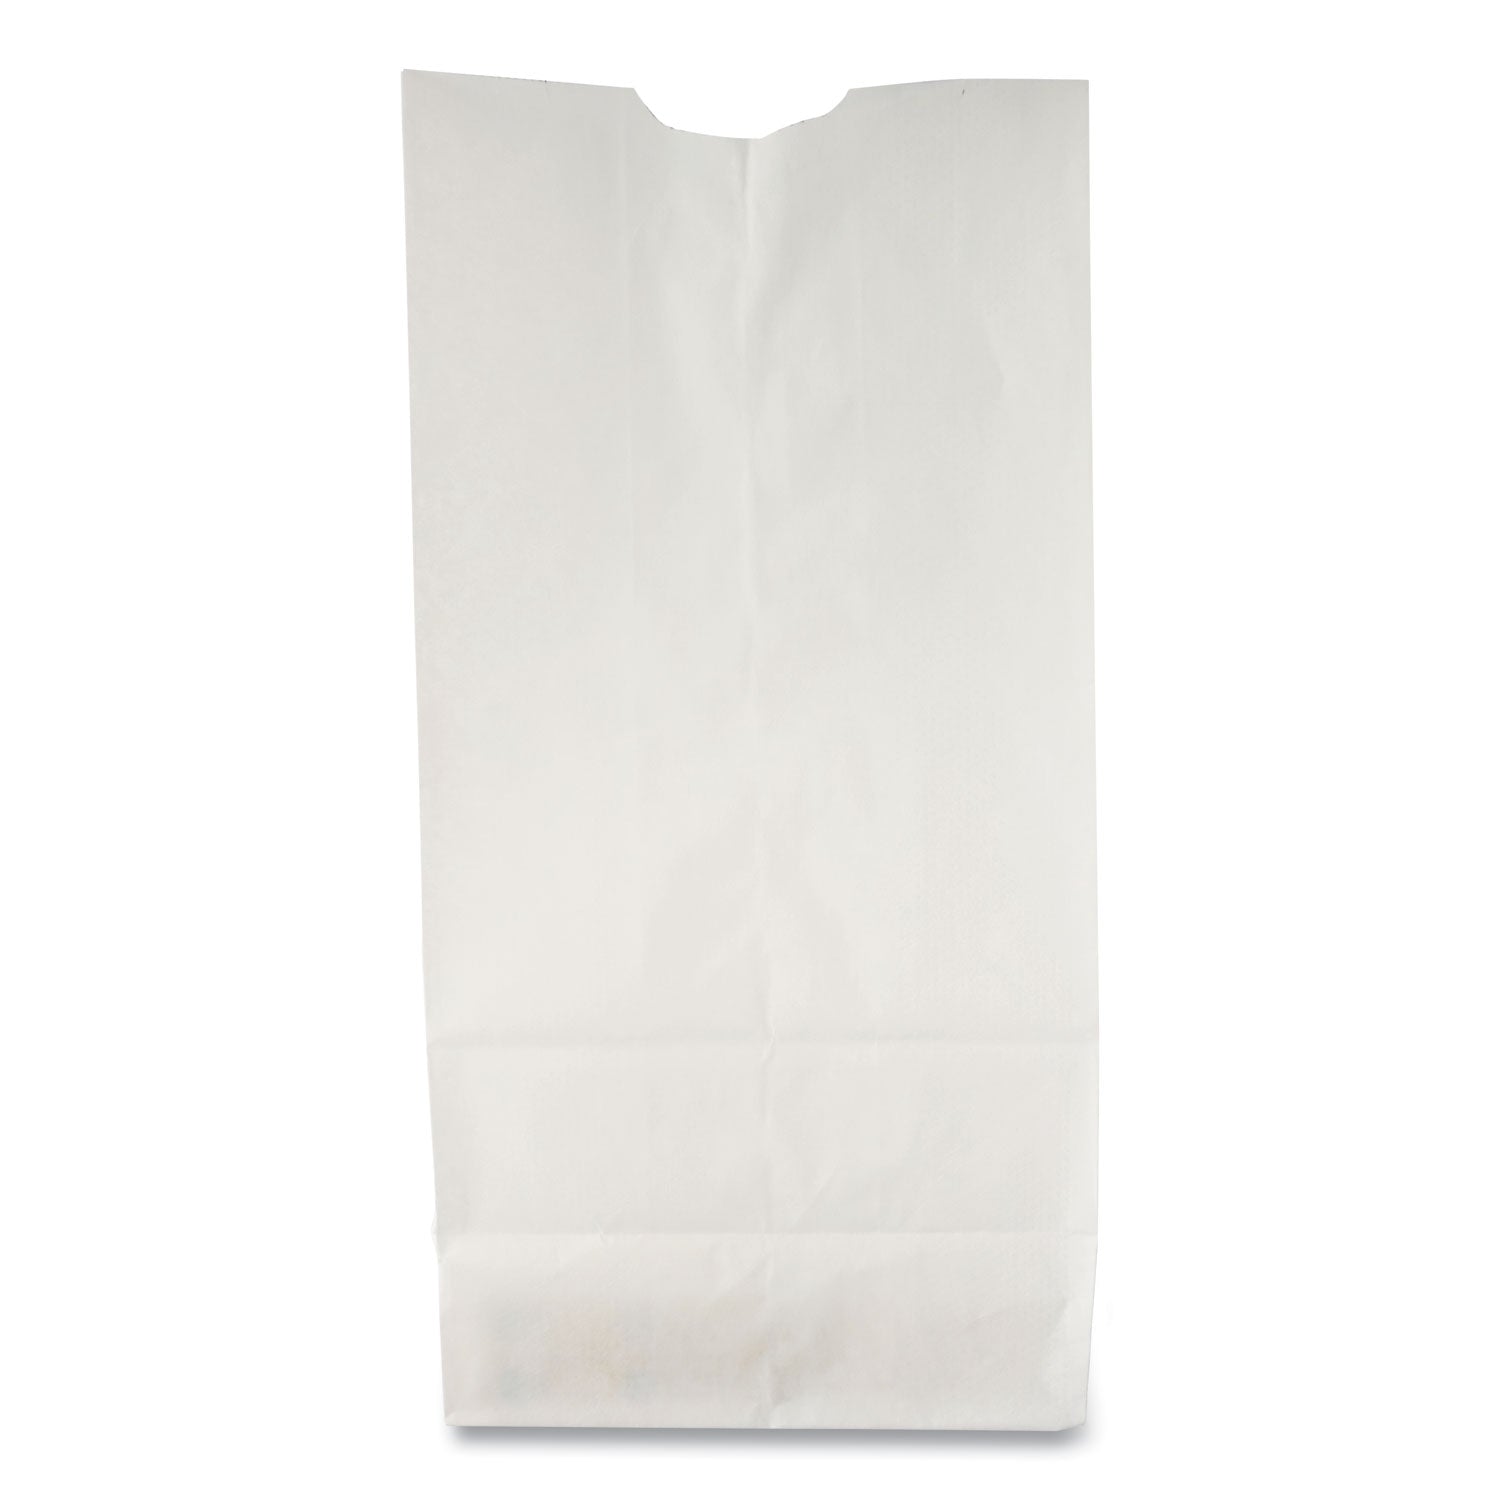 grocery-paper-bags-30-lb-capacity-#2-431-x-244-x-788-white-500-bags_baggw2500 - 1